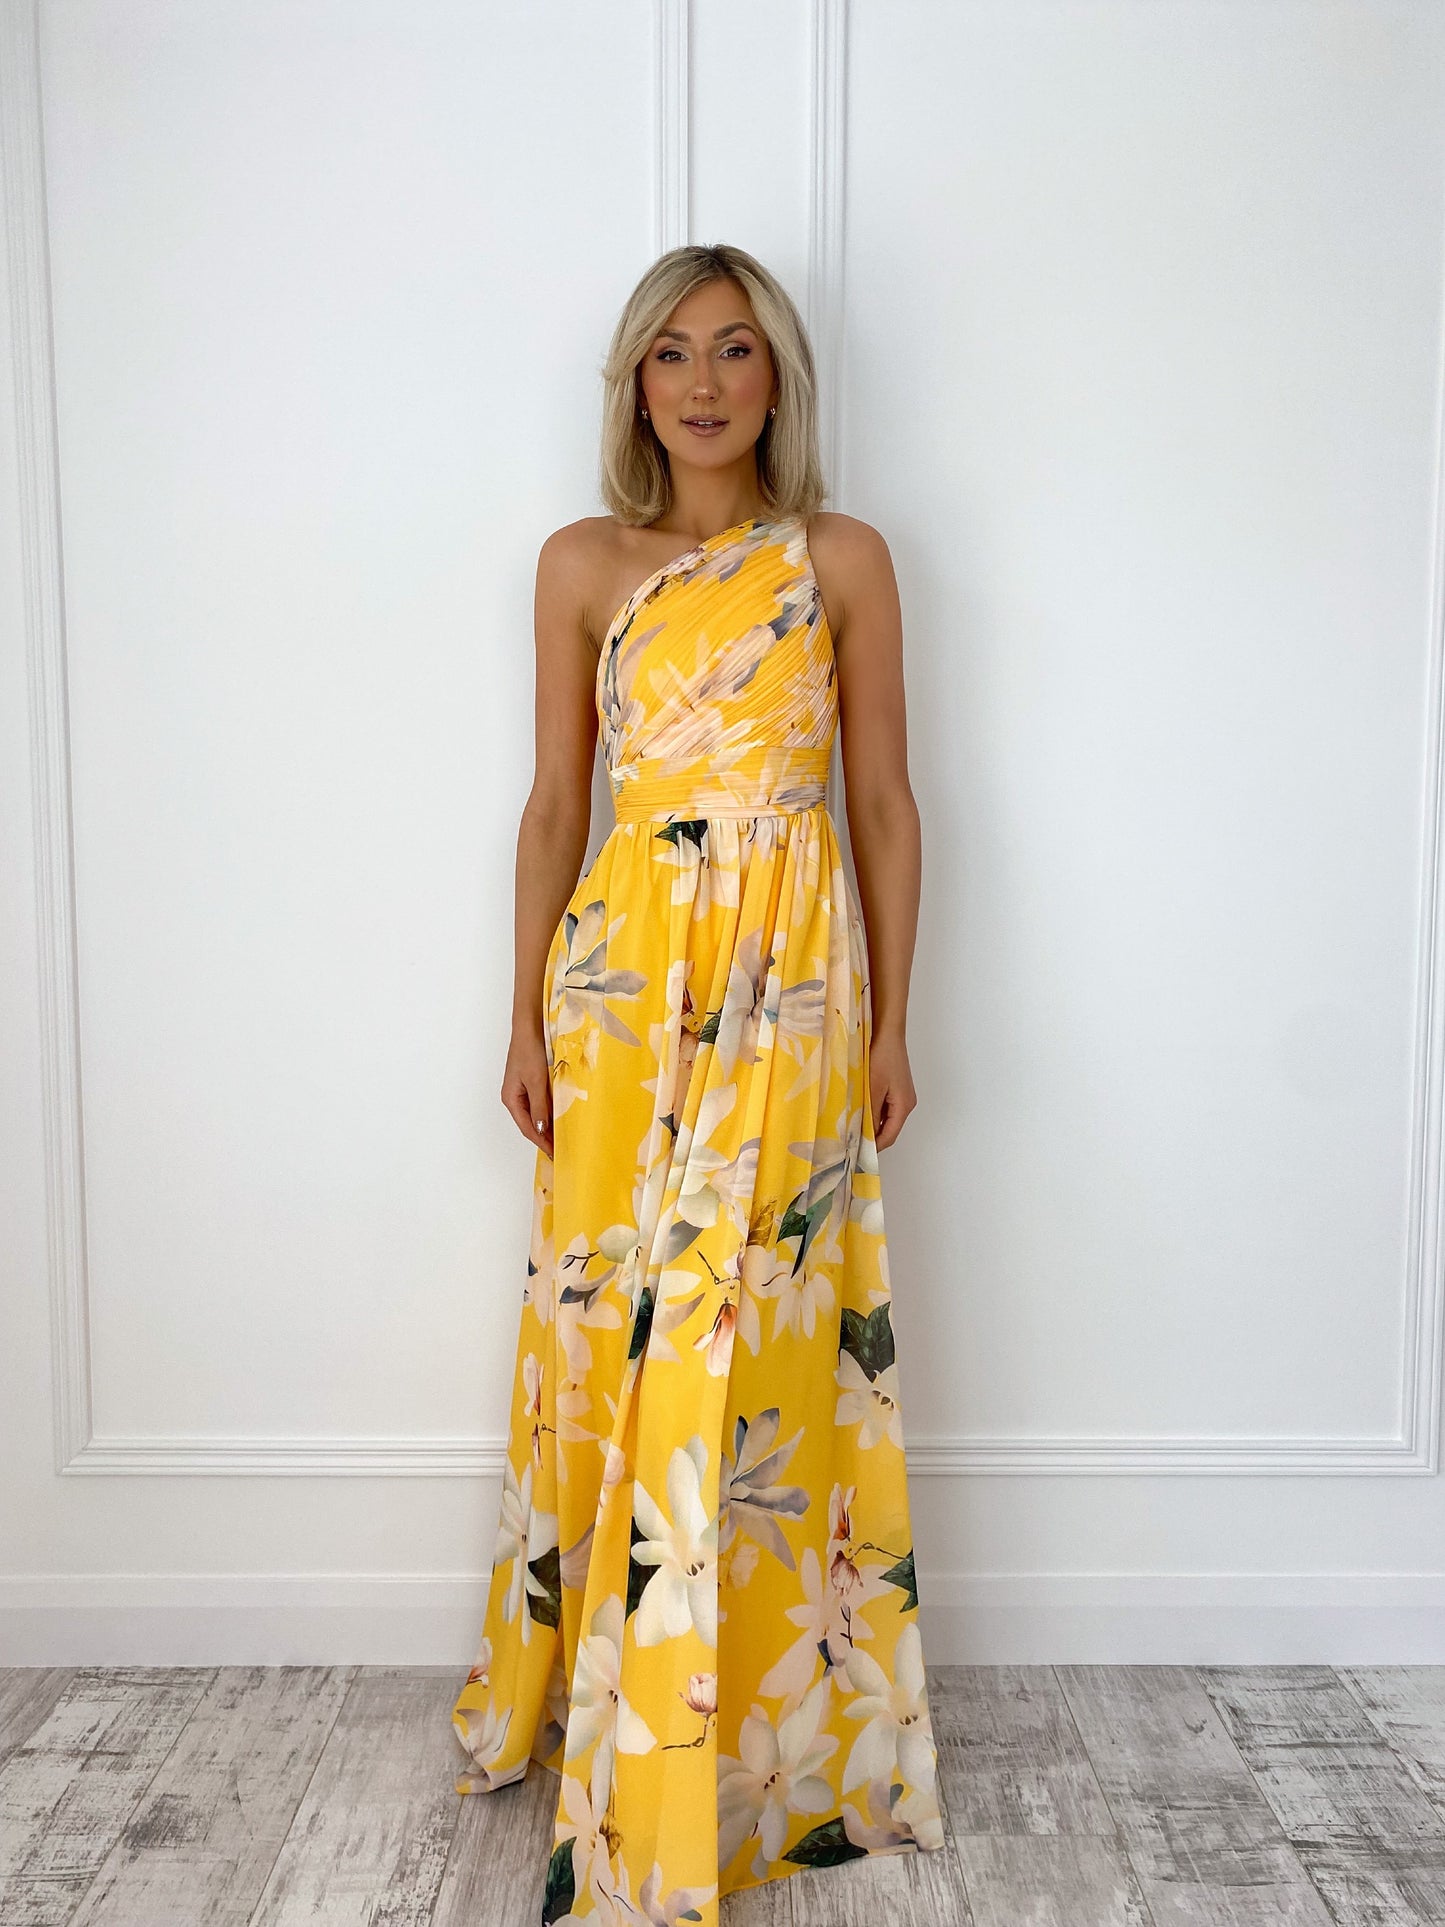 a woman in a yellow dress standing in front of a door 